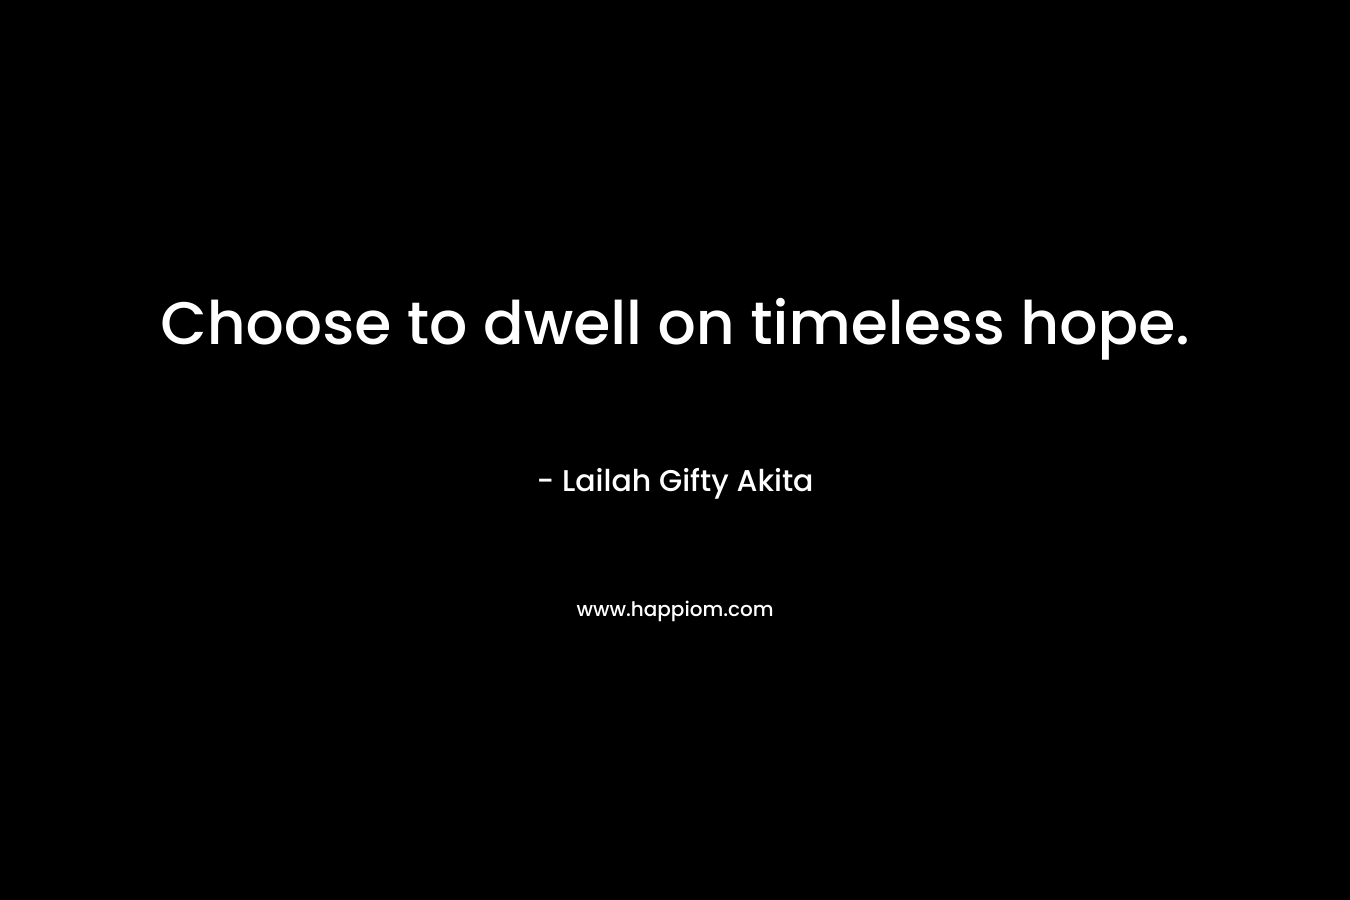 Choose to dwell on timeless hope.